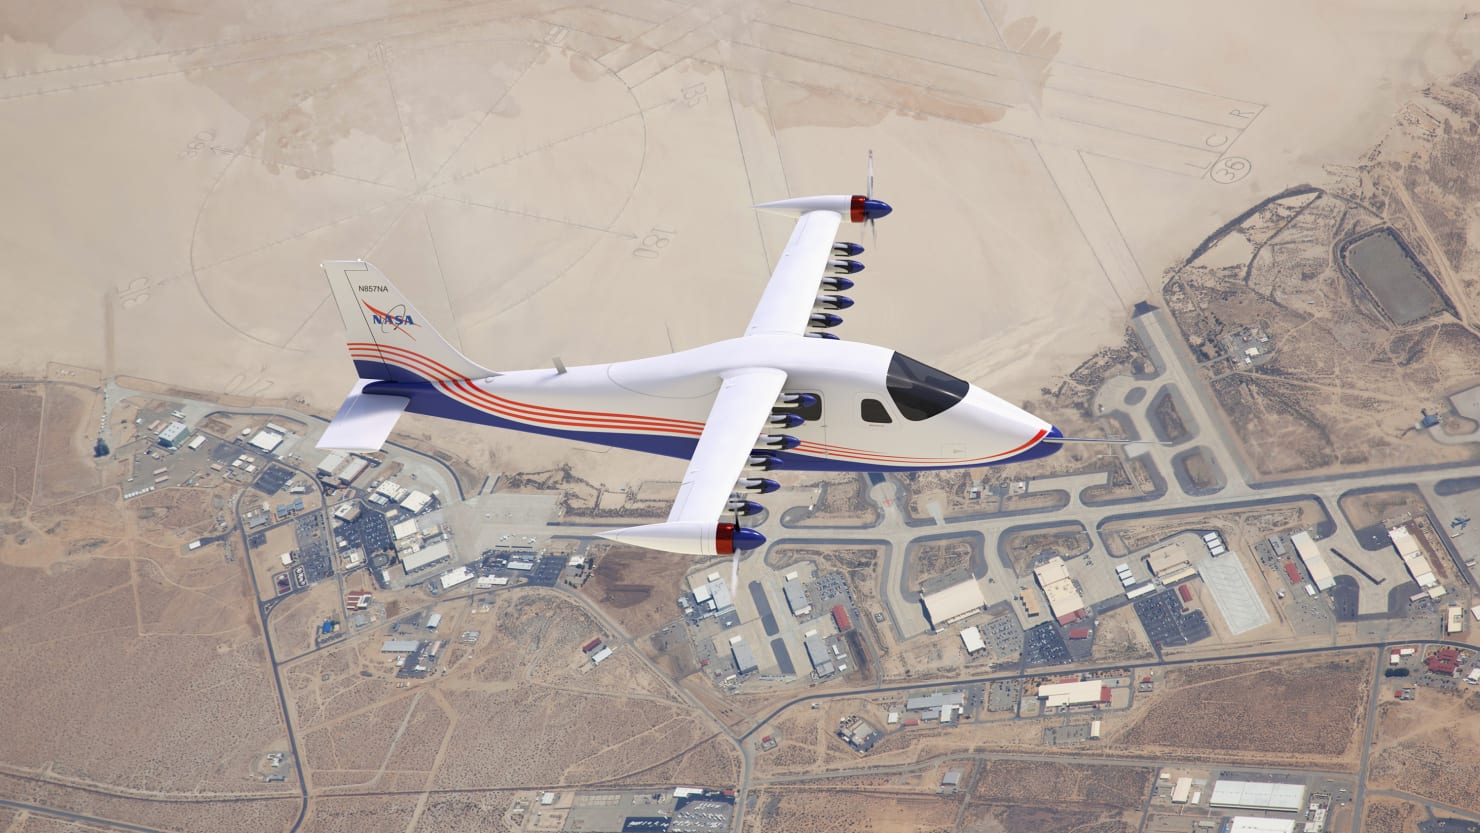 NASAs X-57 All-Electric Plane Set to Take Off and Launch New Era of Aviation